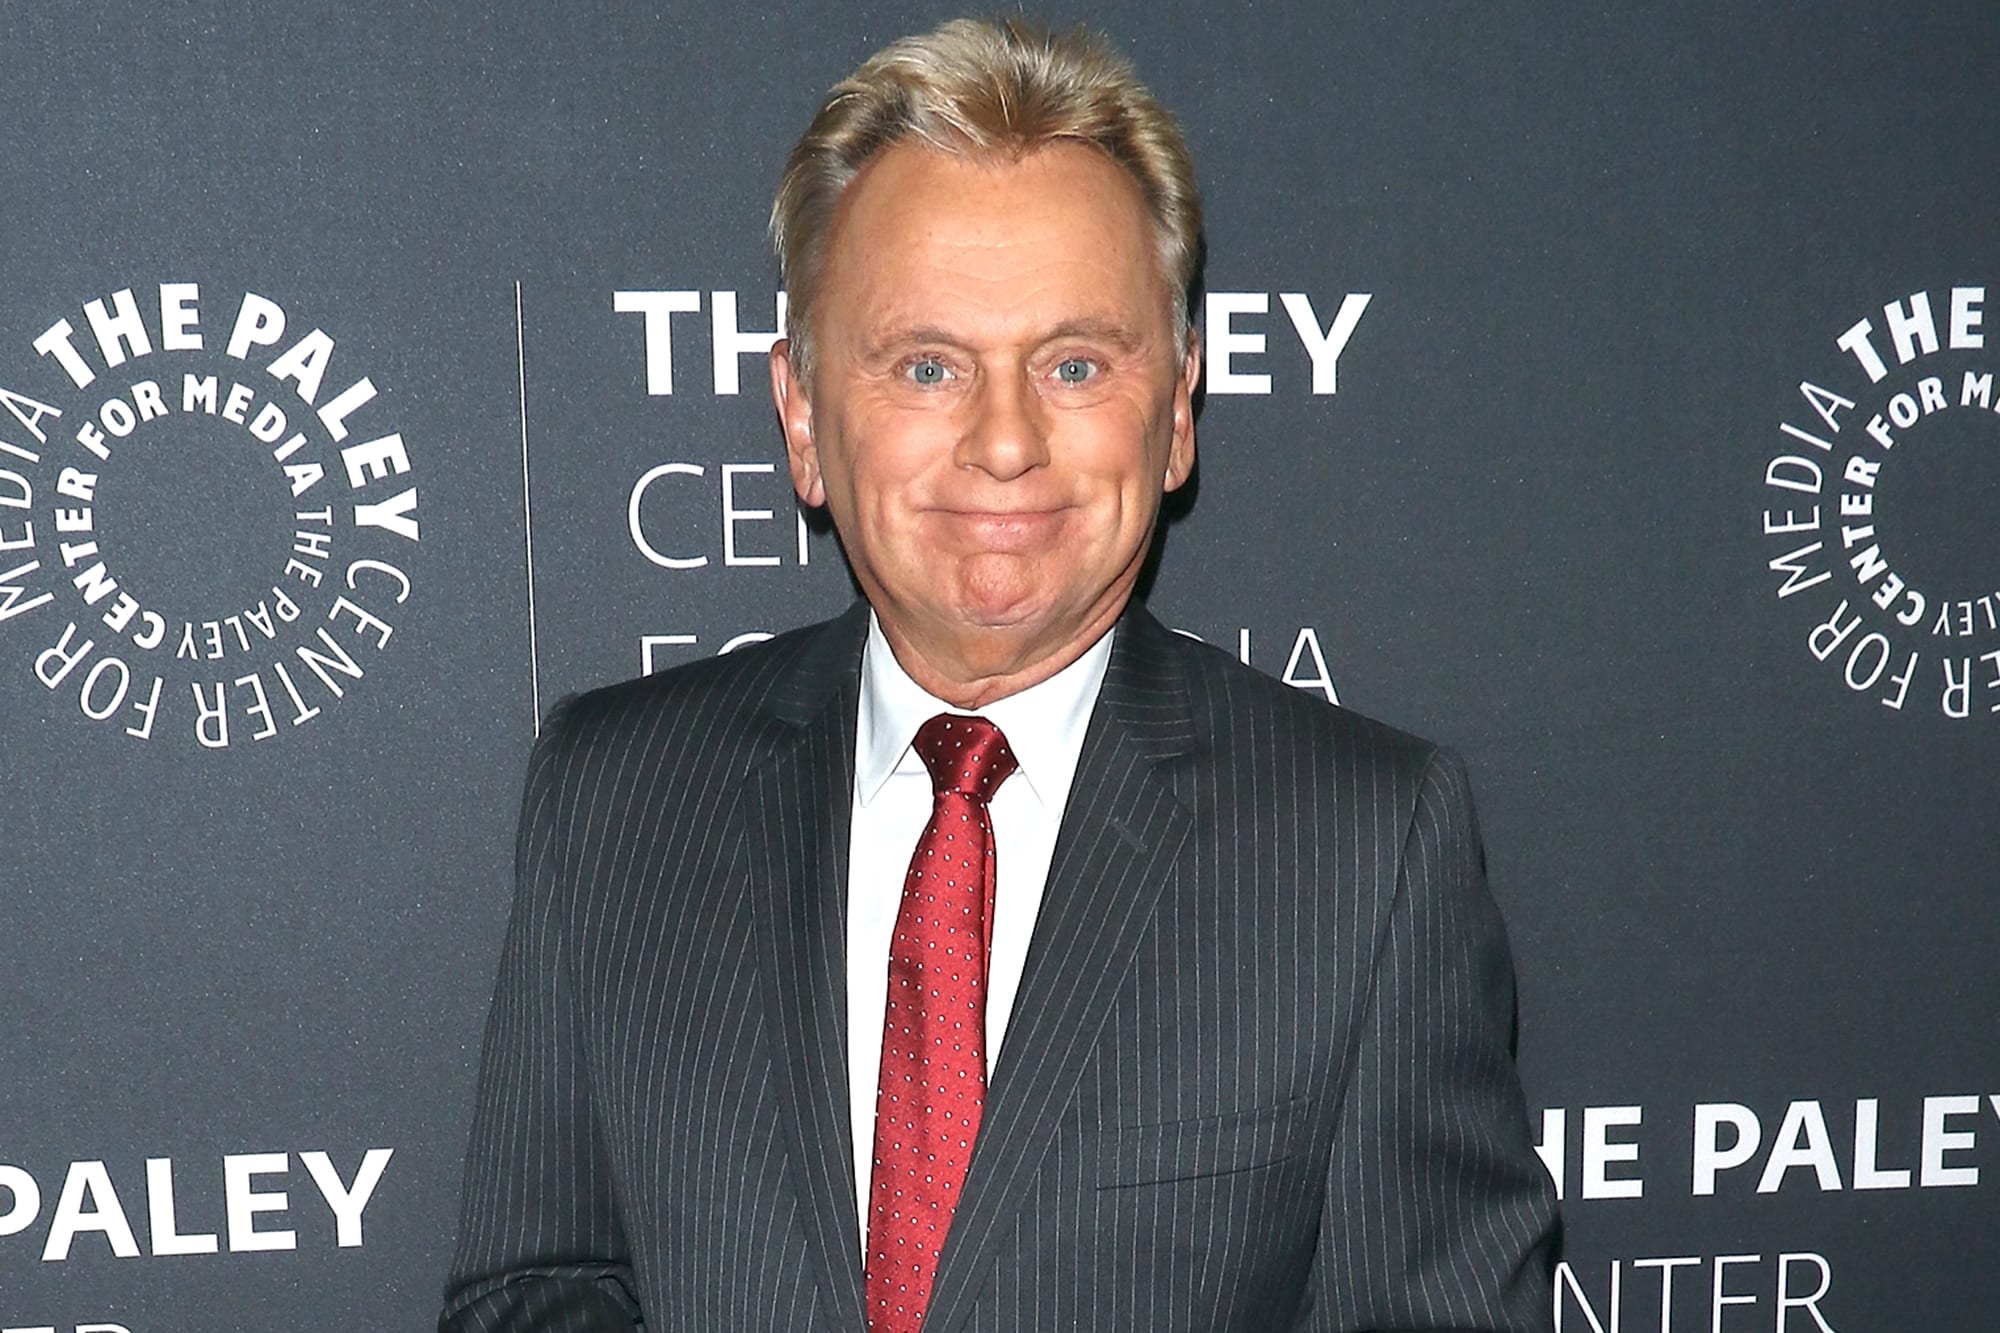 Pat Sajak Net Worth How Much Does The 'Wheel of Fortune' Host Earn